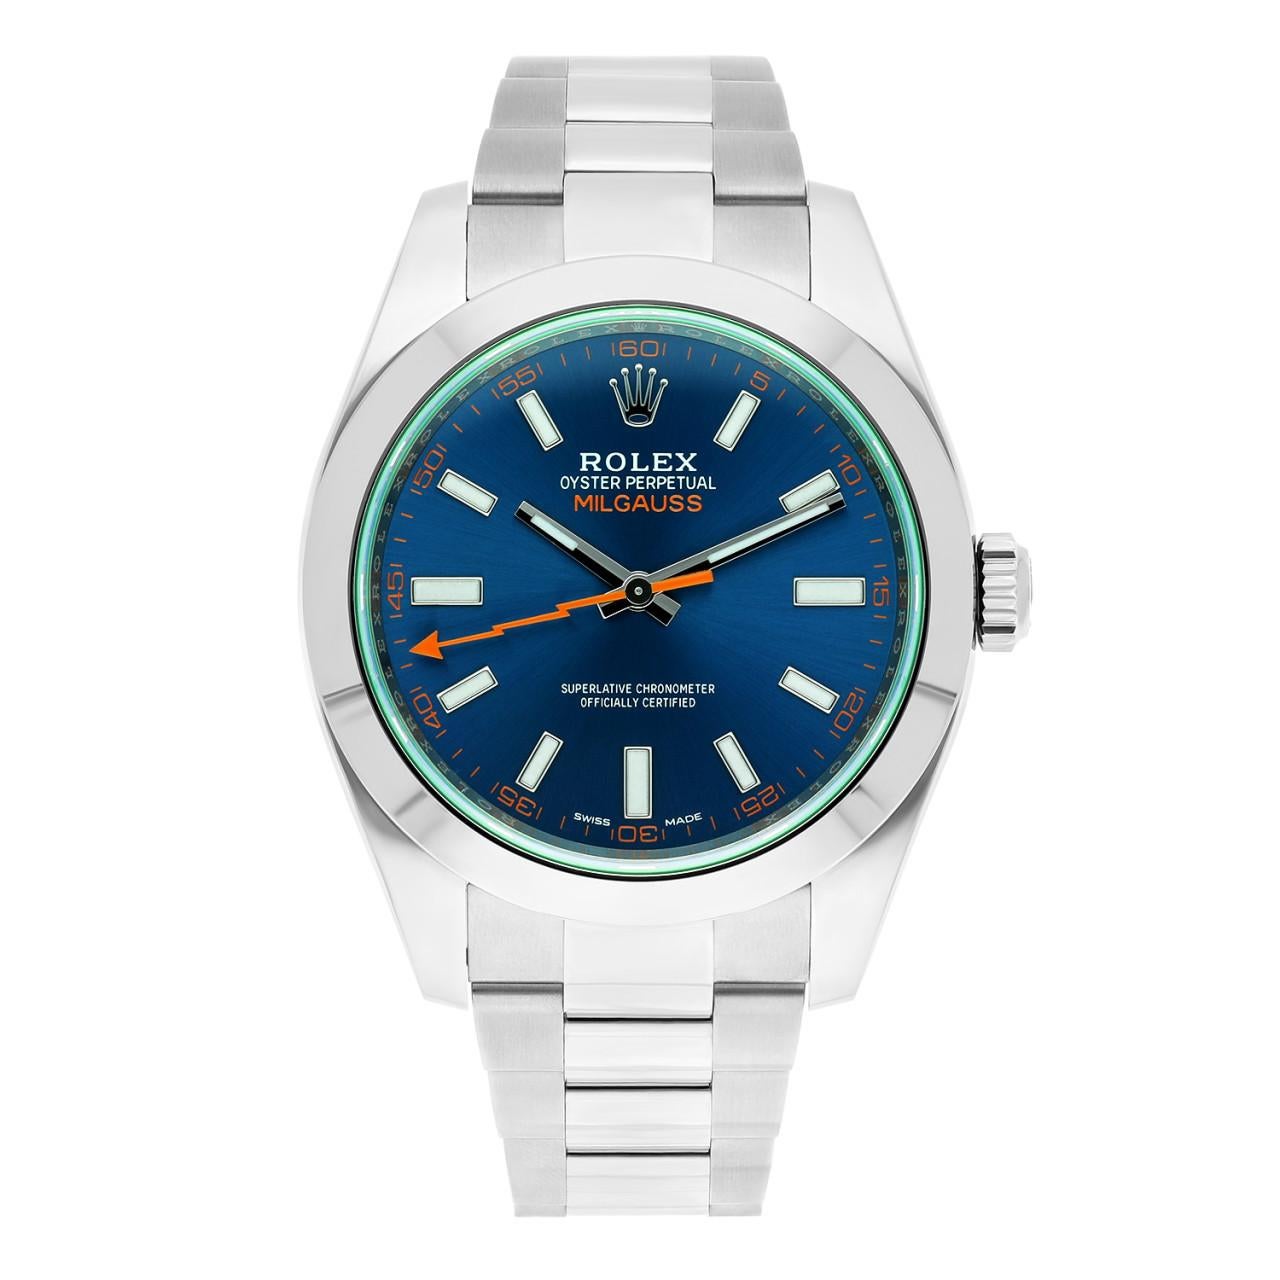 Stainless steel case with a stainless steel Rolex oyster bracelet. Fixed stainless steel bezel. Blue dial with luminous silver-tone hands and index hour markers. Minute markers around the outer rim. Luminescent hands and markers. Automatic movement